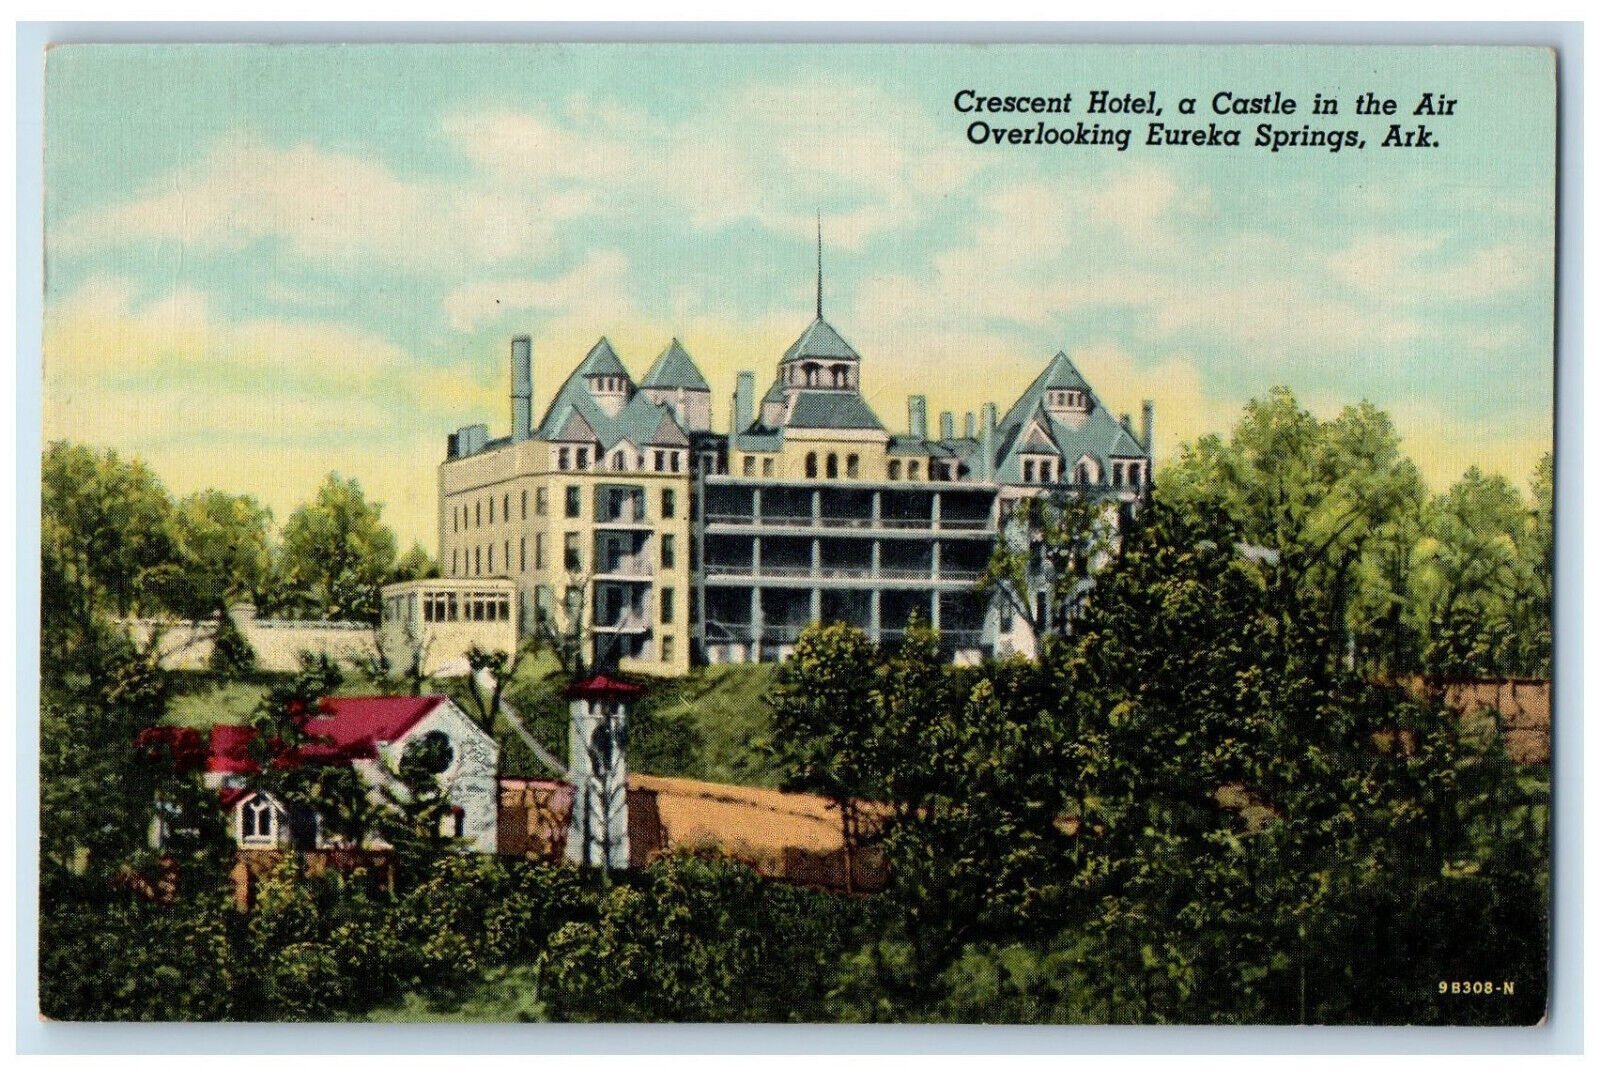 1952 Crescent Hotel a Castle in the Air, Overlooking Eureka Springs AR Postcard